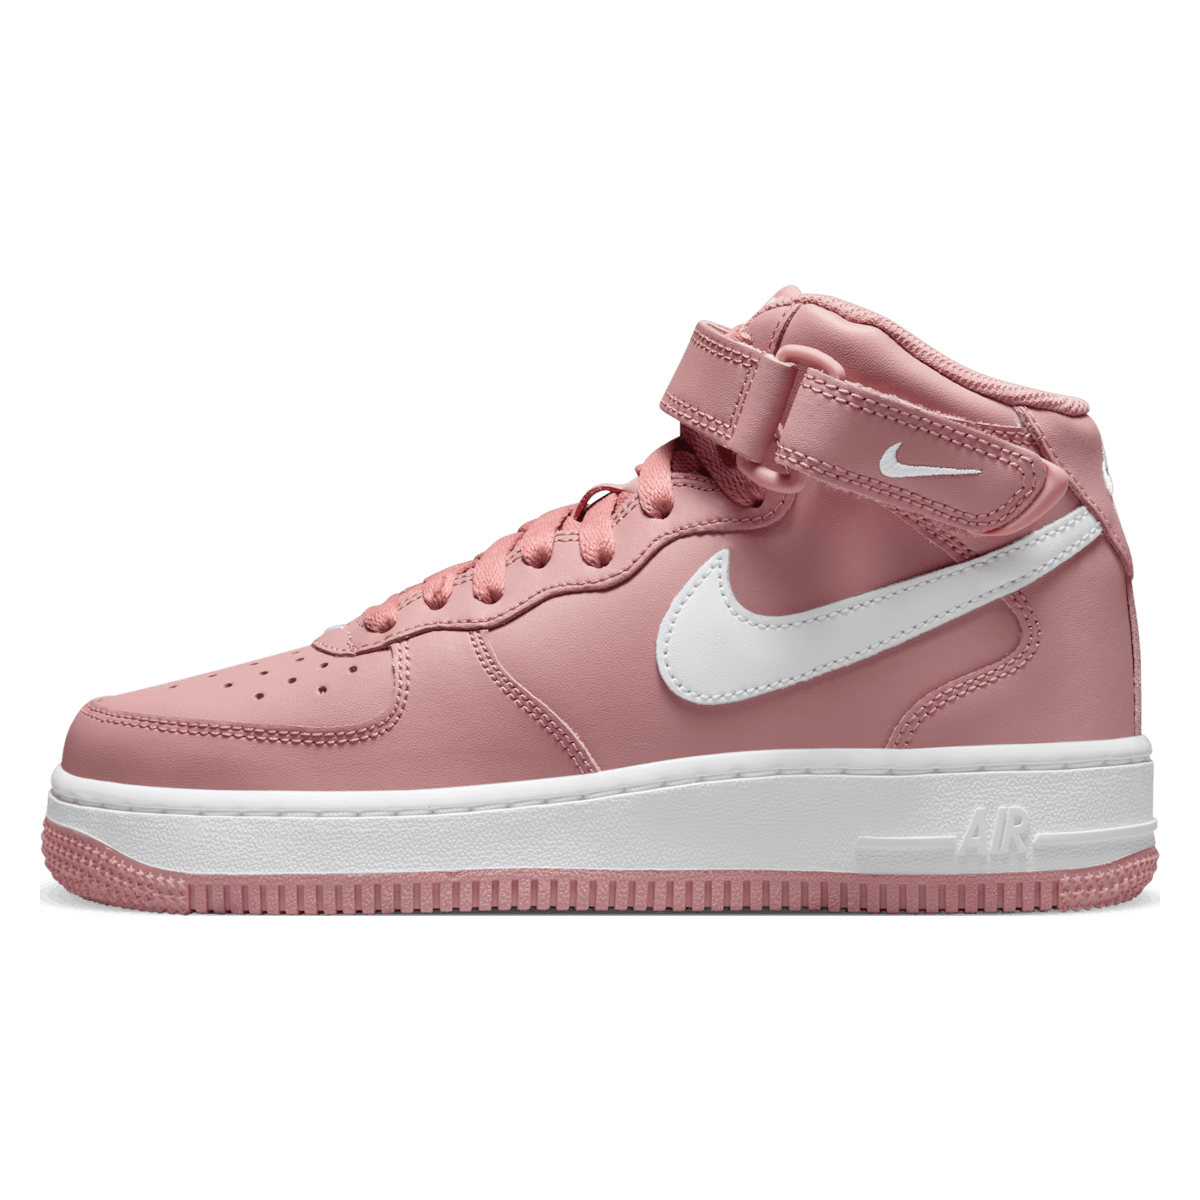 Nike Air Force 1 Mid LE GS "Red Stardust"